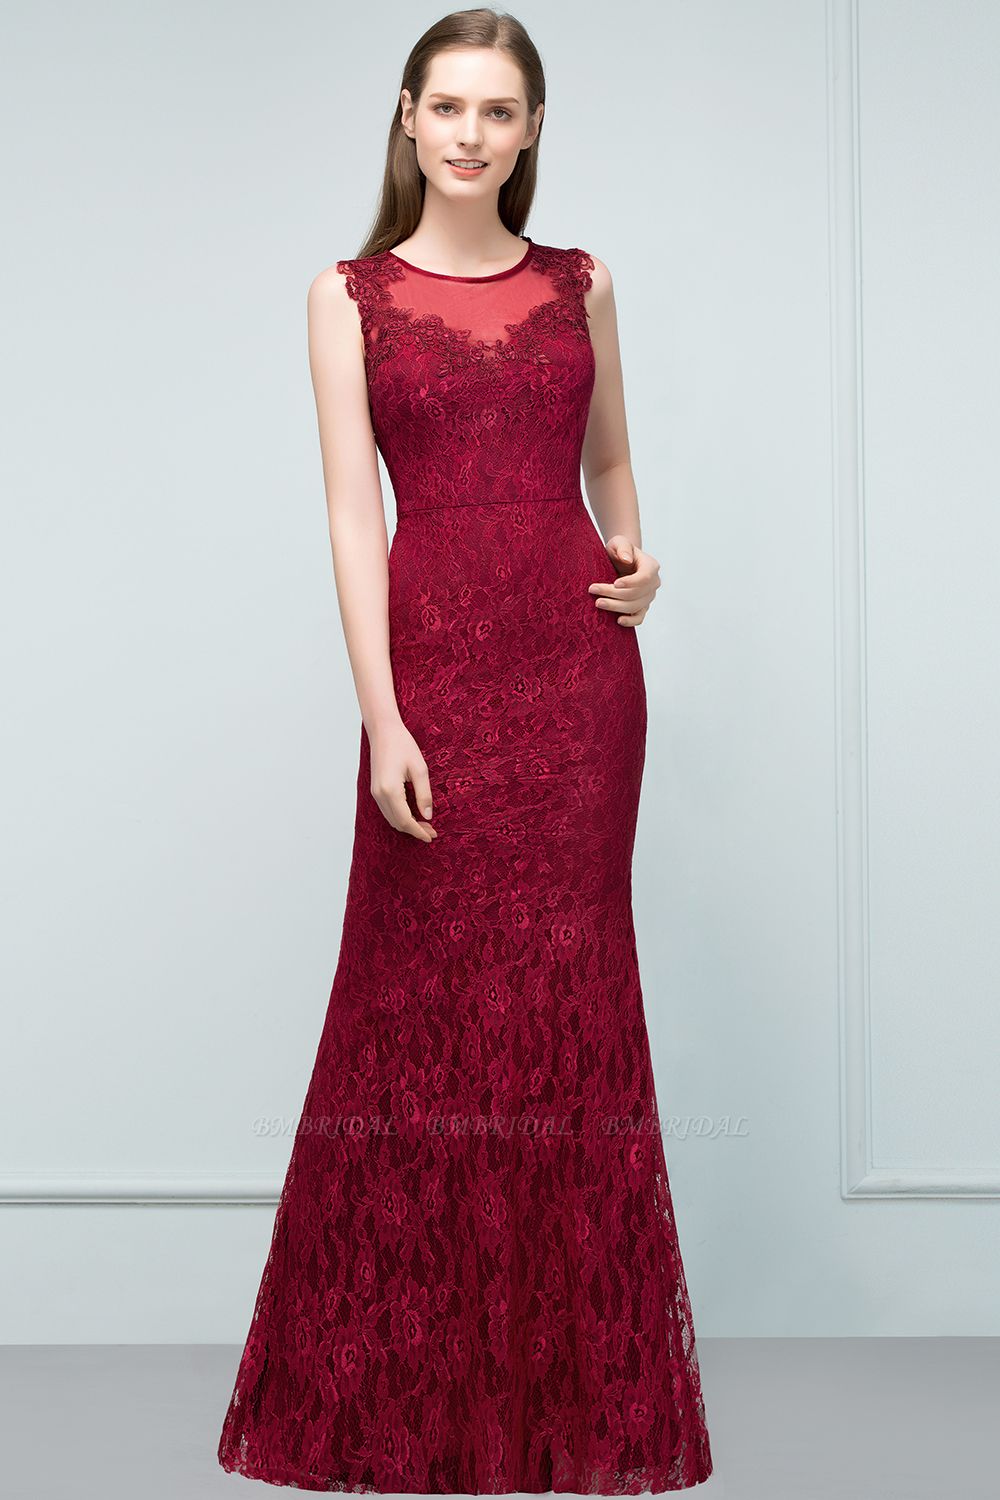 BMbridal Gorgeous Bugrundy Lace Prom Dress Long Mermaid Evening Gowns Online